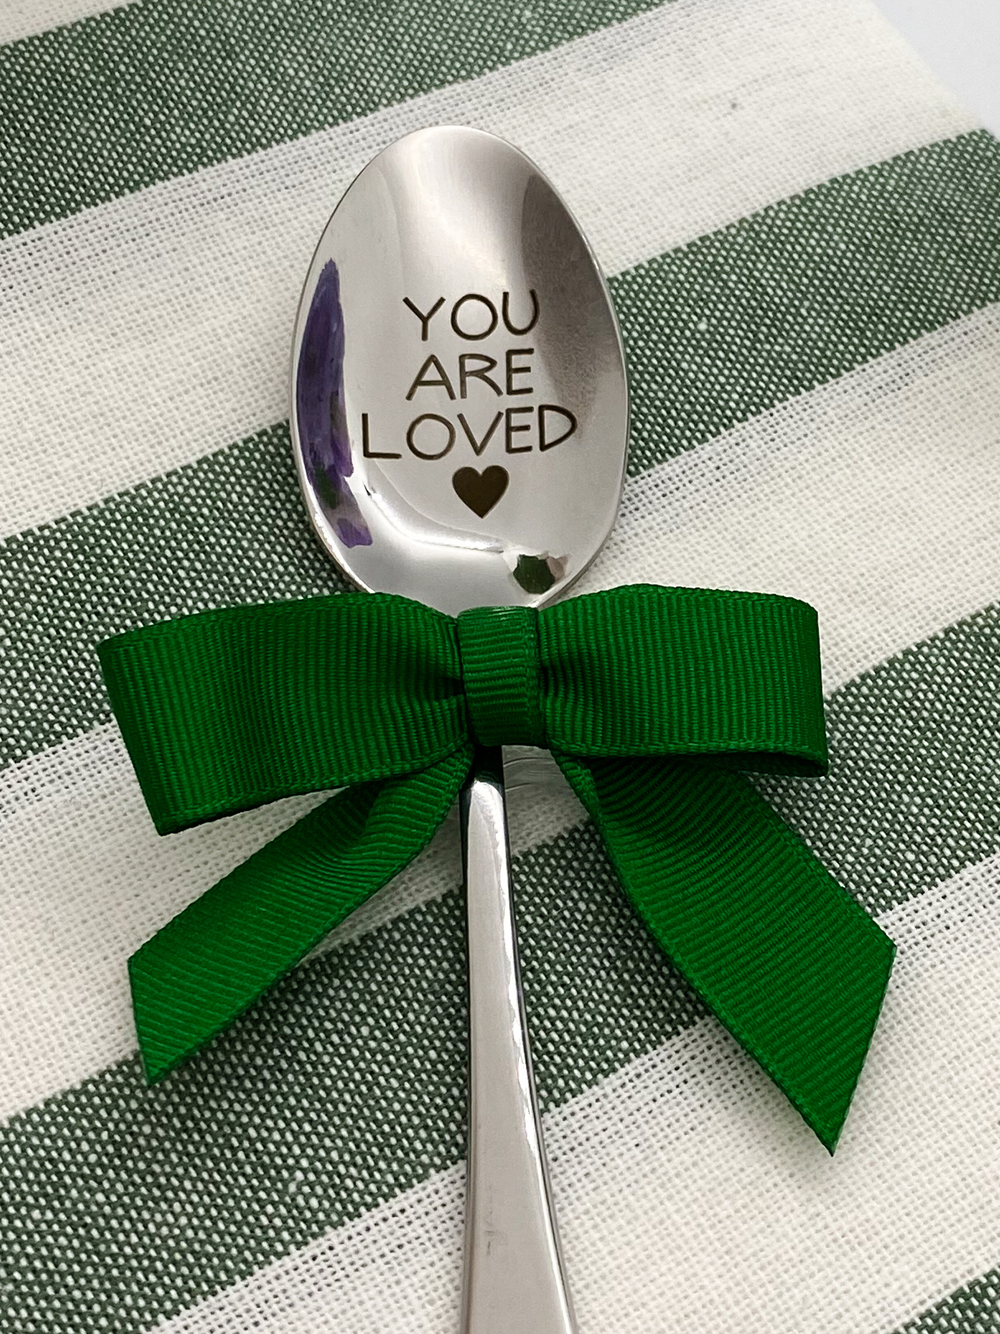 Our Engraved Spoons are Now Available!